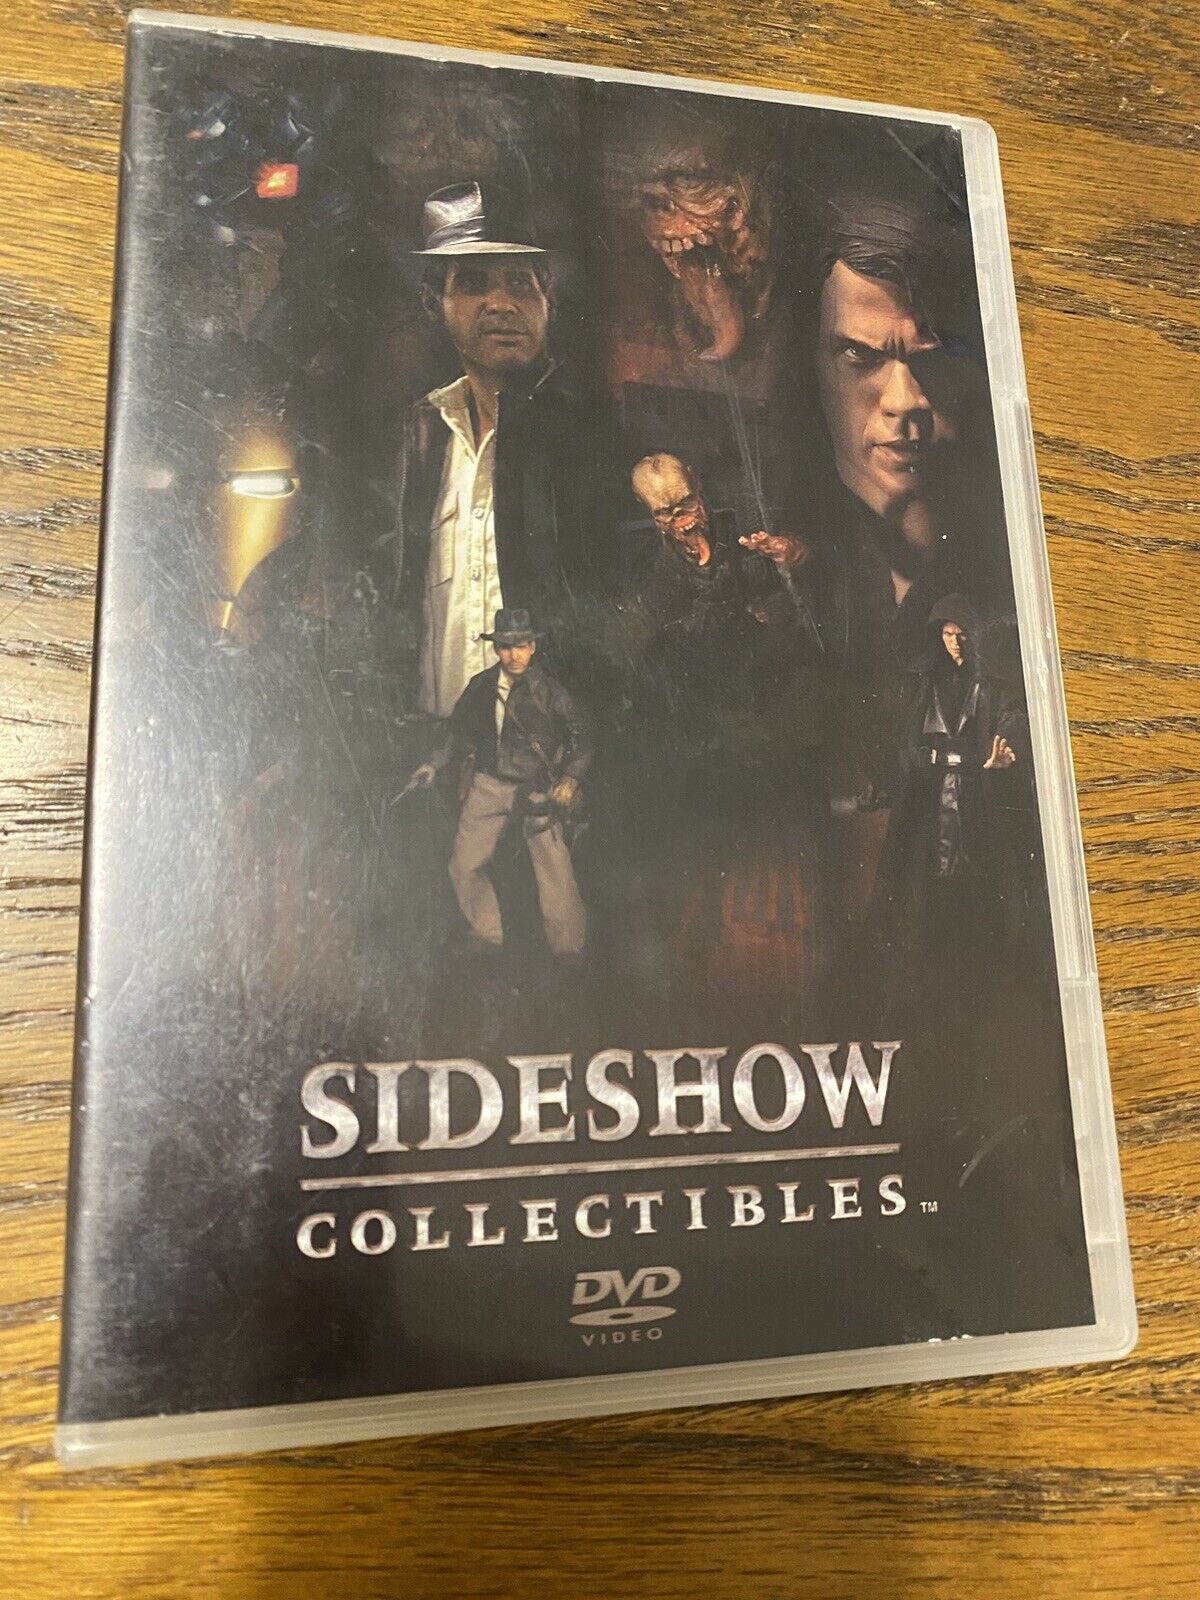 Sideshow Collectibles 2008 SDCC Dvd Rare Marvel Star Wars Indiana Jones